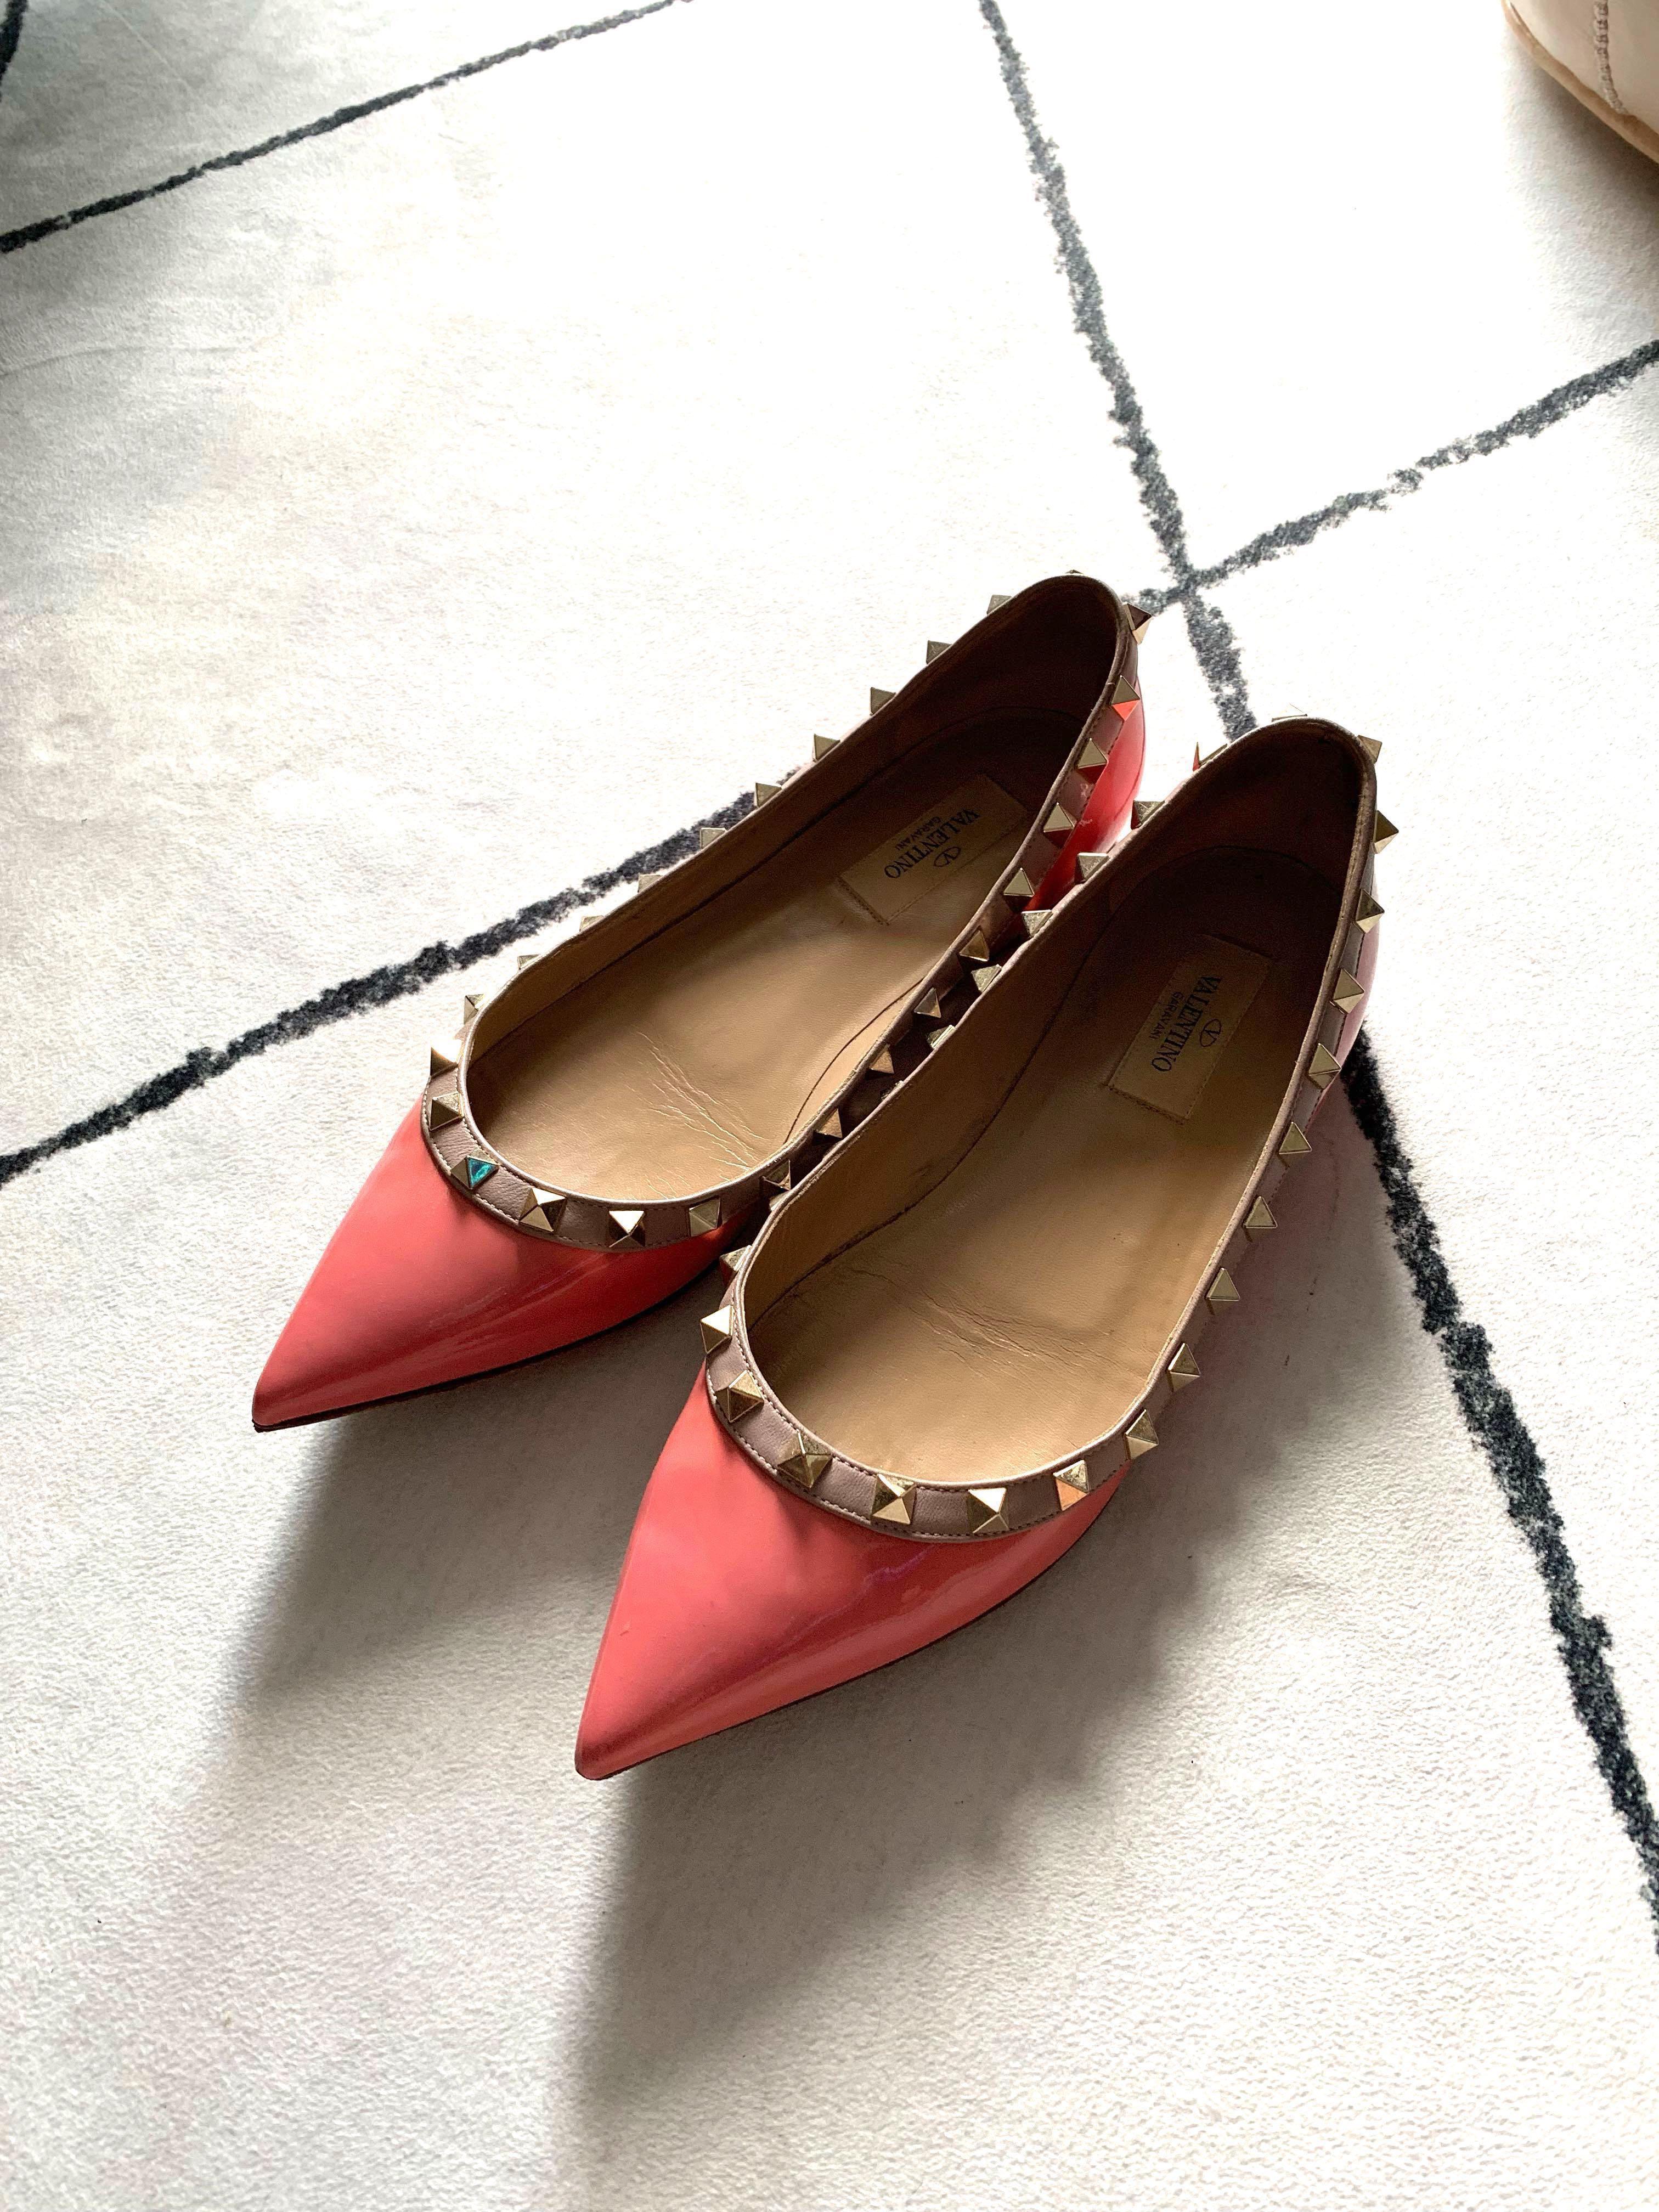 Authentic Preloved Valentino Rockstud Flats Salmon Pink Patent 37 5 Luxury Shoes On Carousell